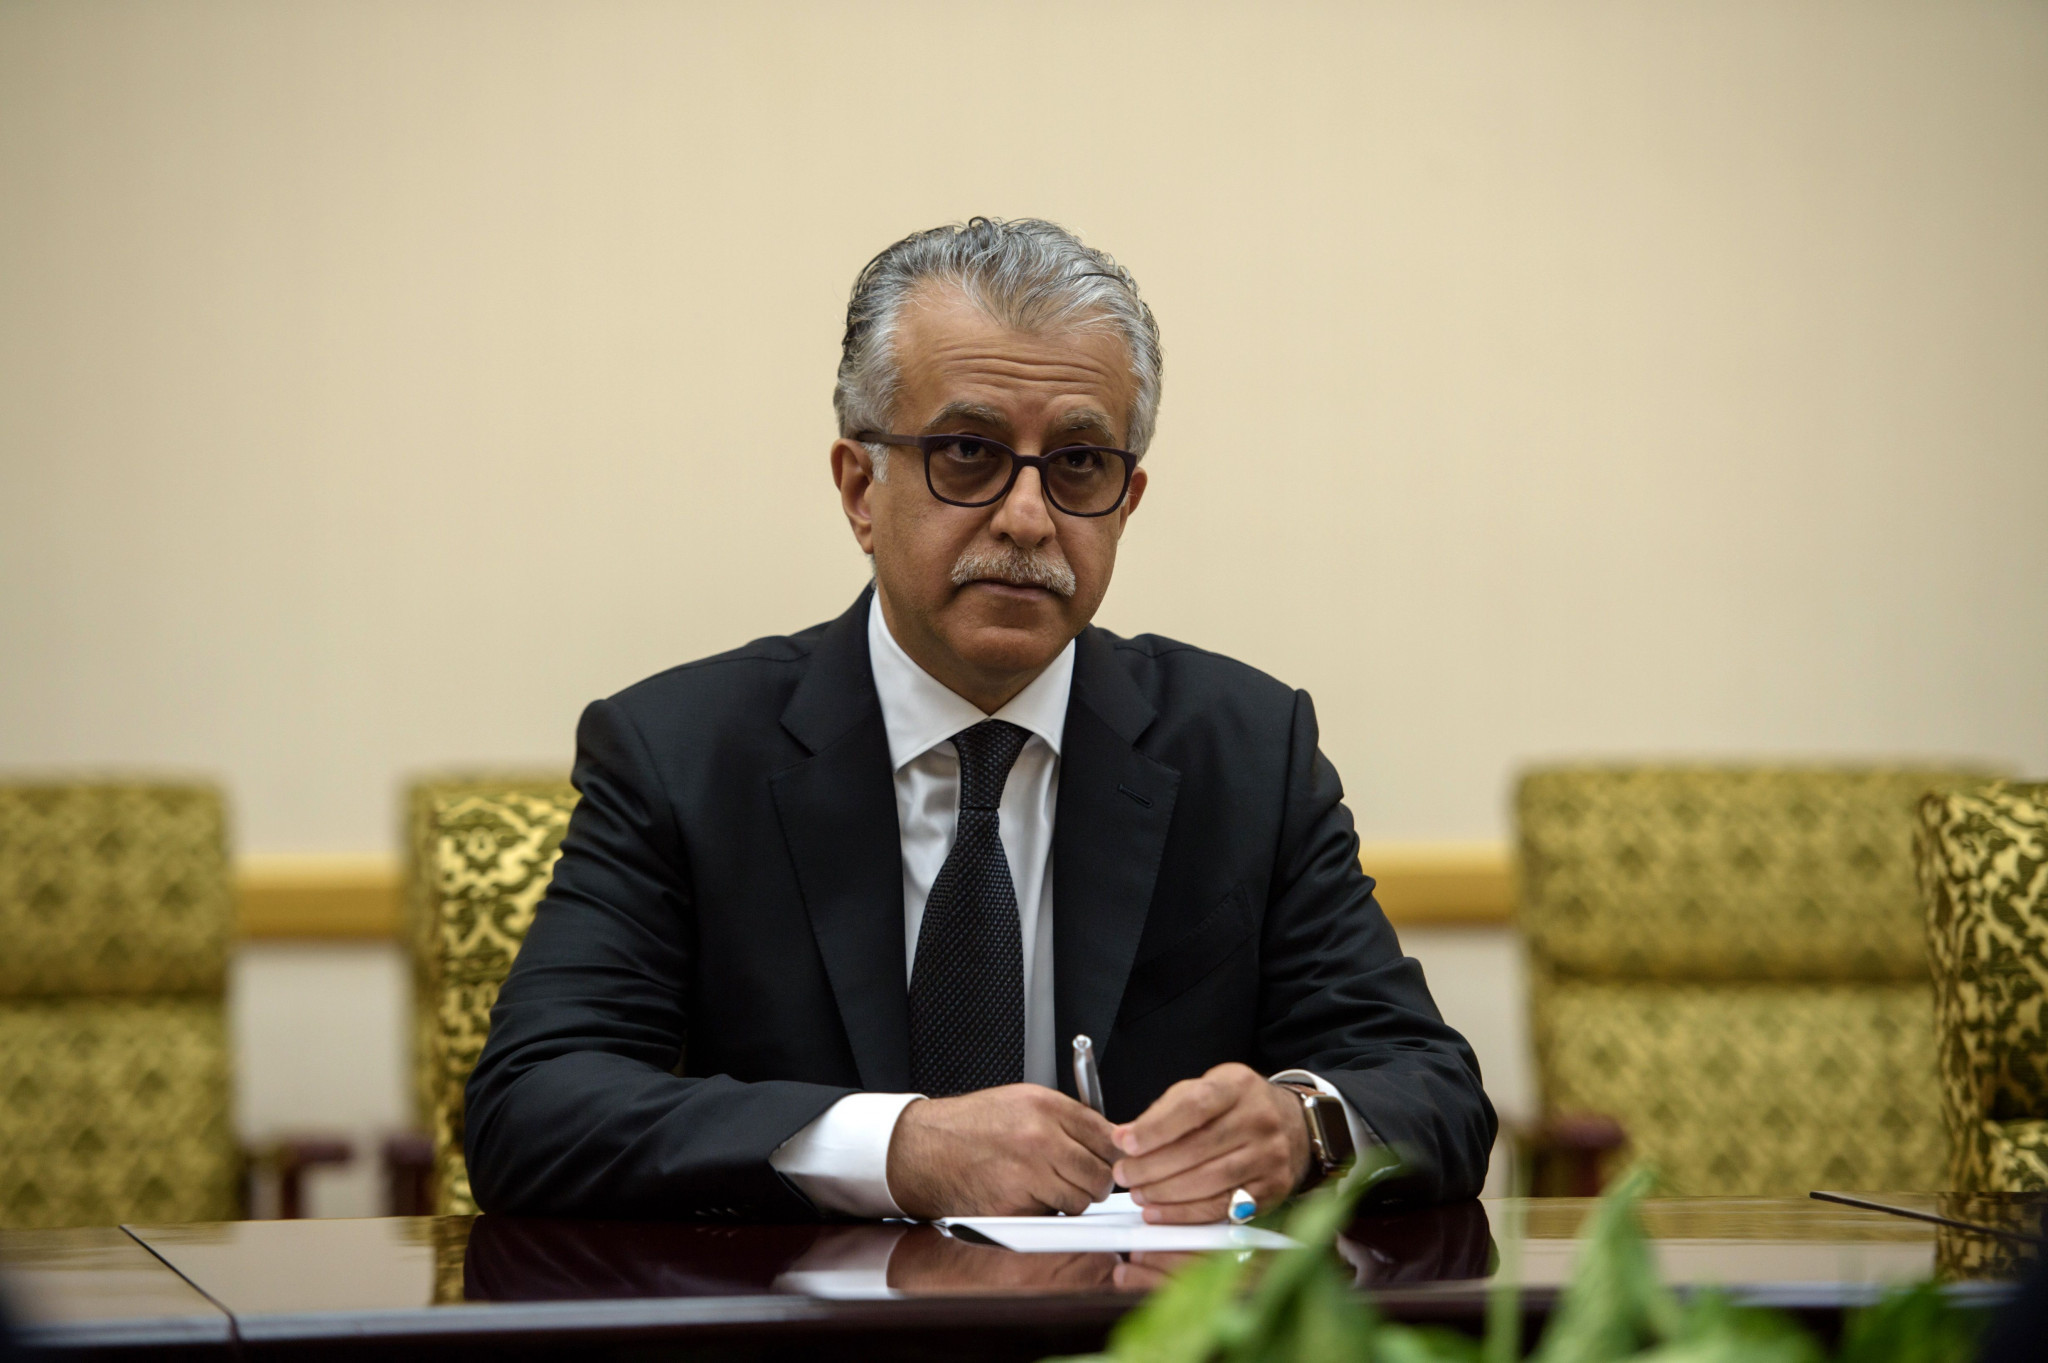 AFC President Shaikh Salman Bin Ebrahim Al Khalifa pledged his support to members of the organisation affected by the outbreak of coronavirus ©Getty Images